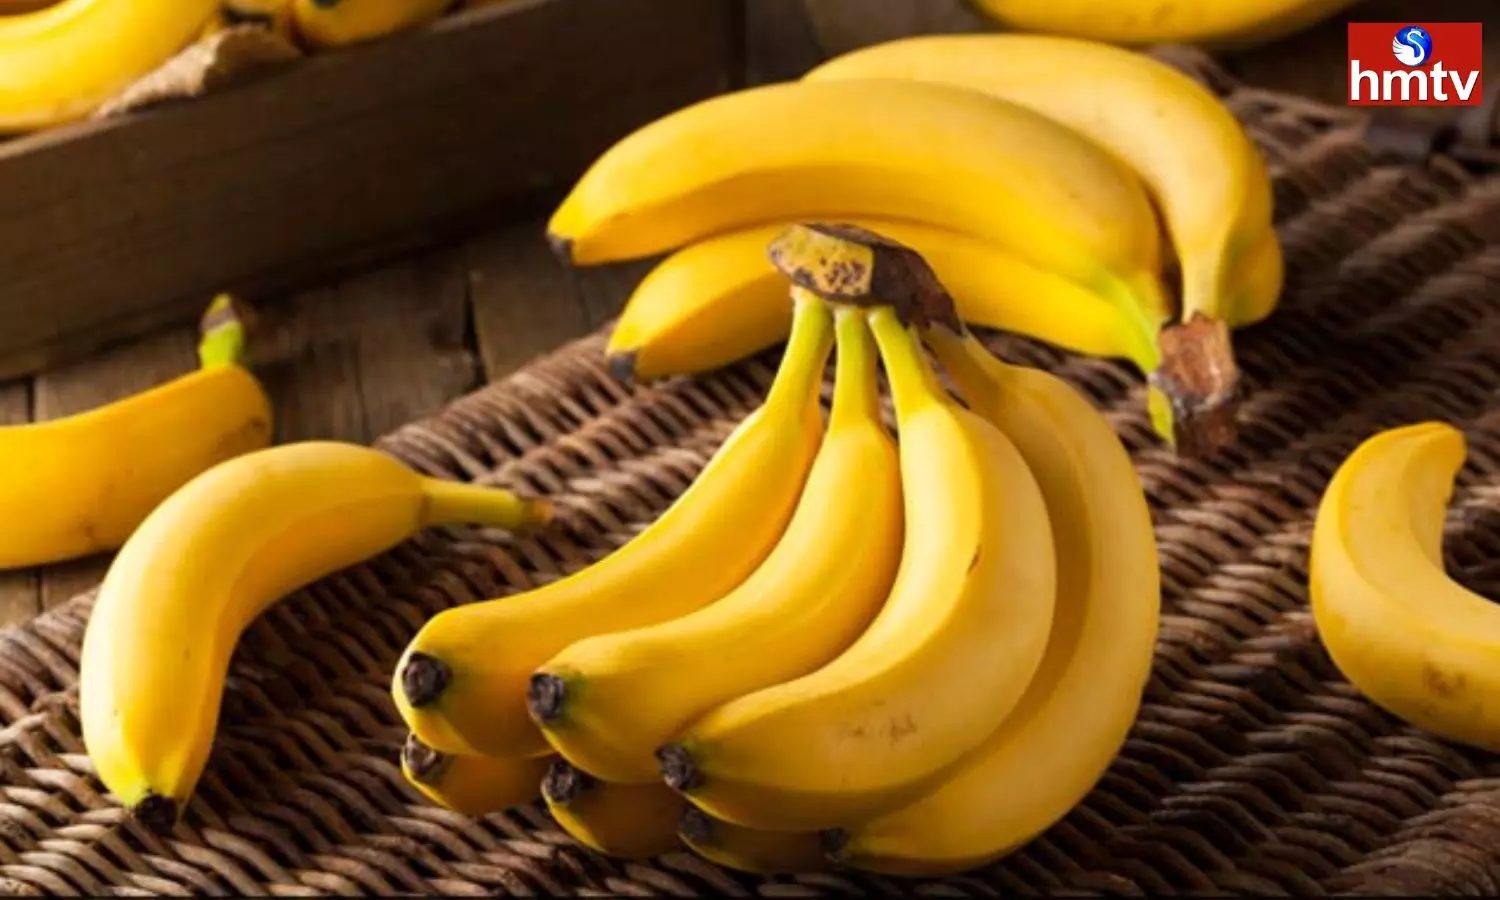 Follow These Tricks to Keep Bananas from Spoiling Quickly